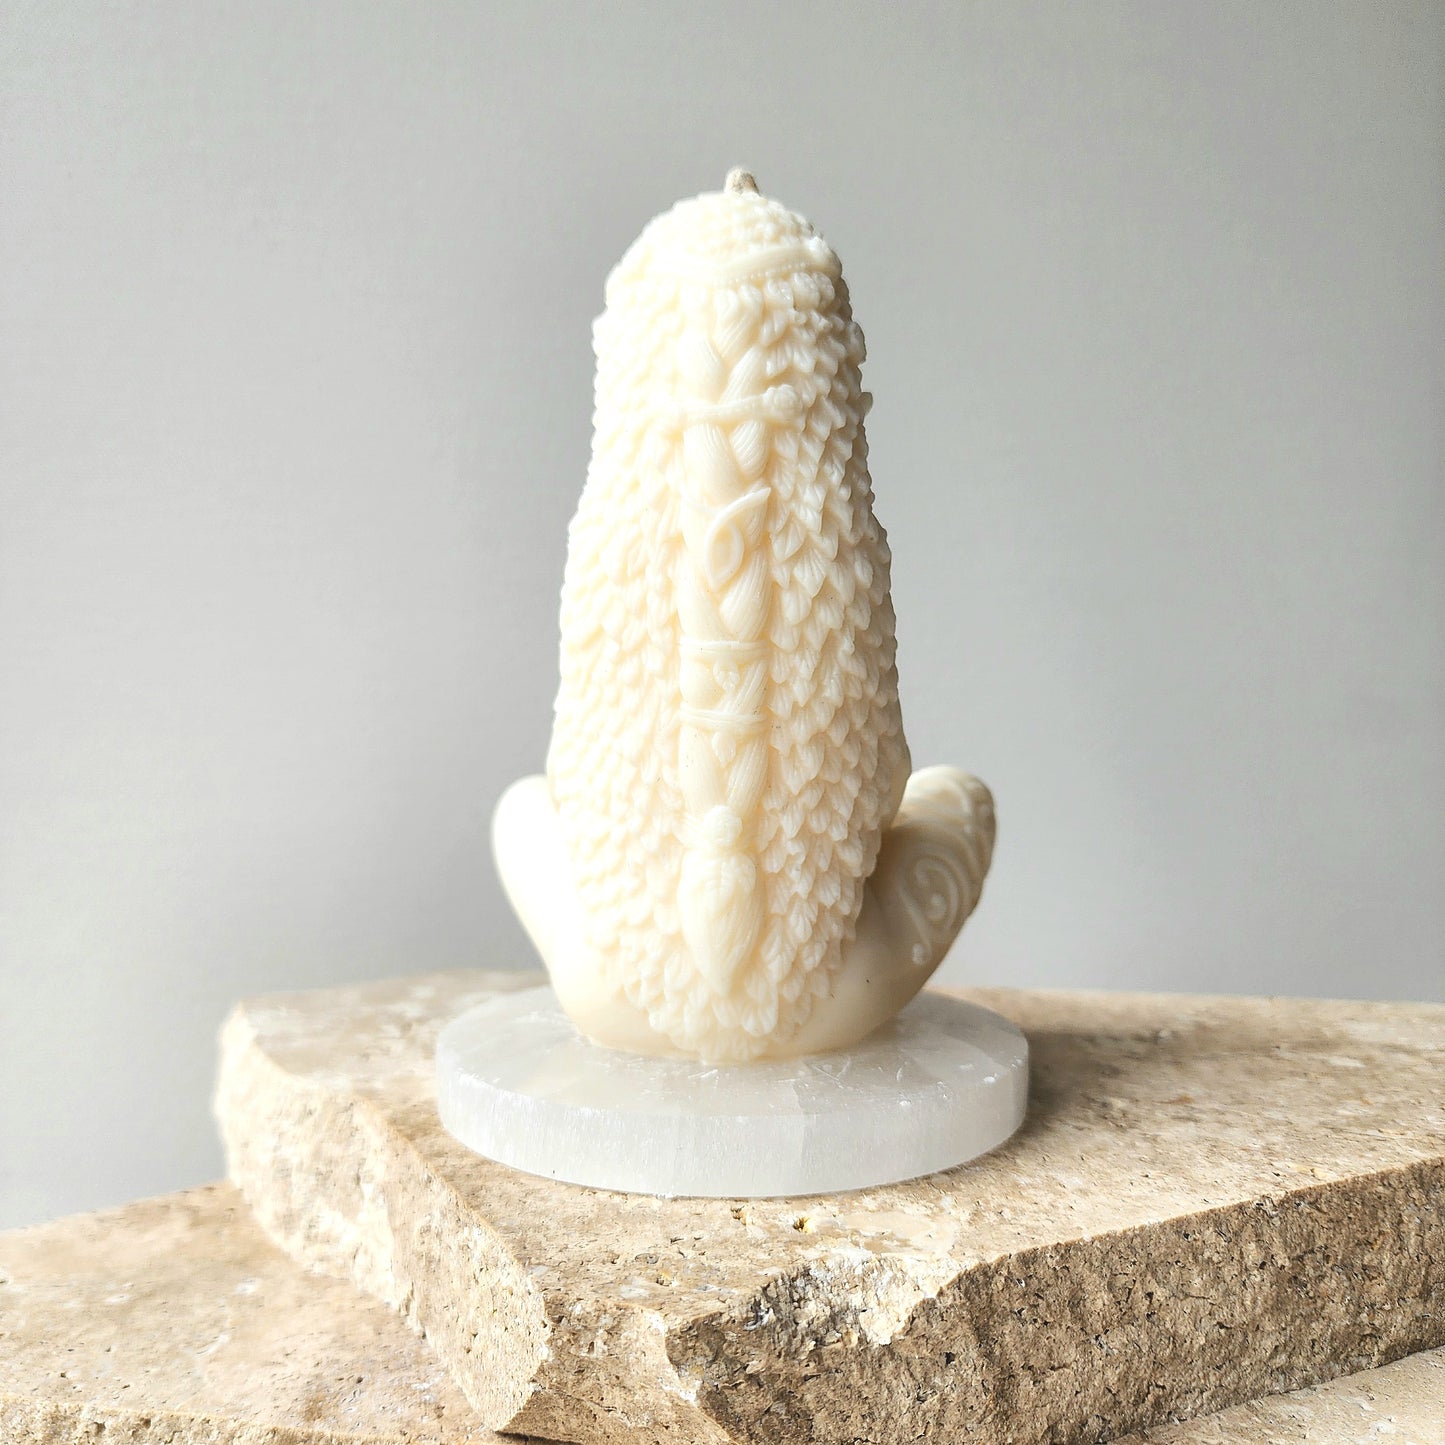 Gaia Goddess of Earth Pillar Candle - Crystals and Me | Crystal Candles and Ethically Sourced Crystals